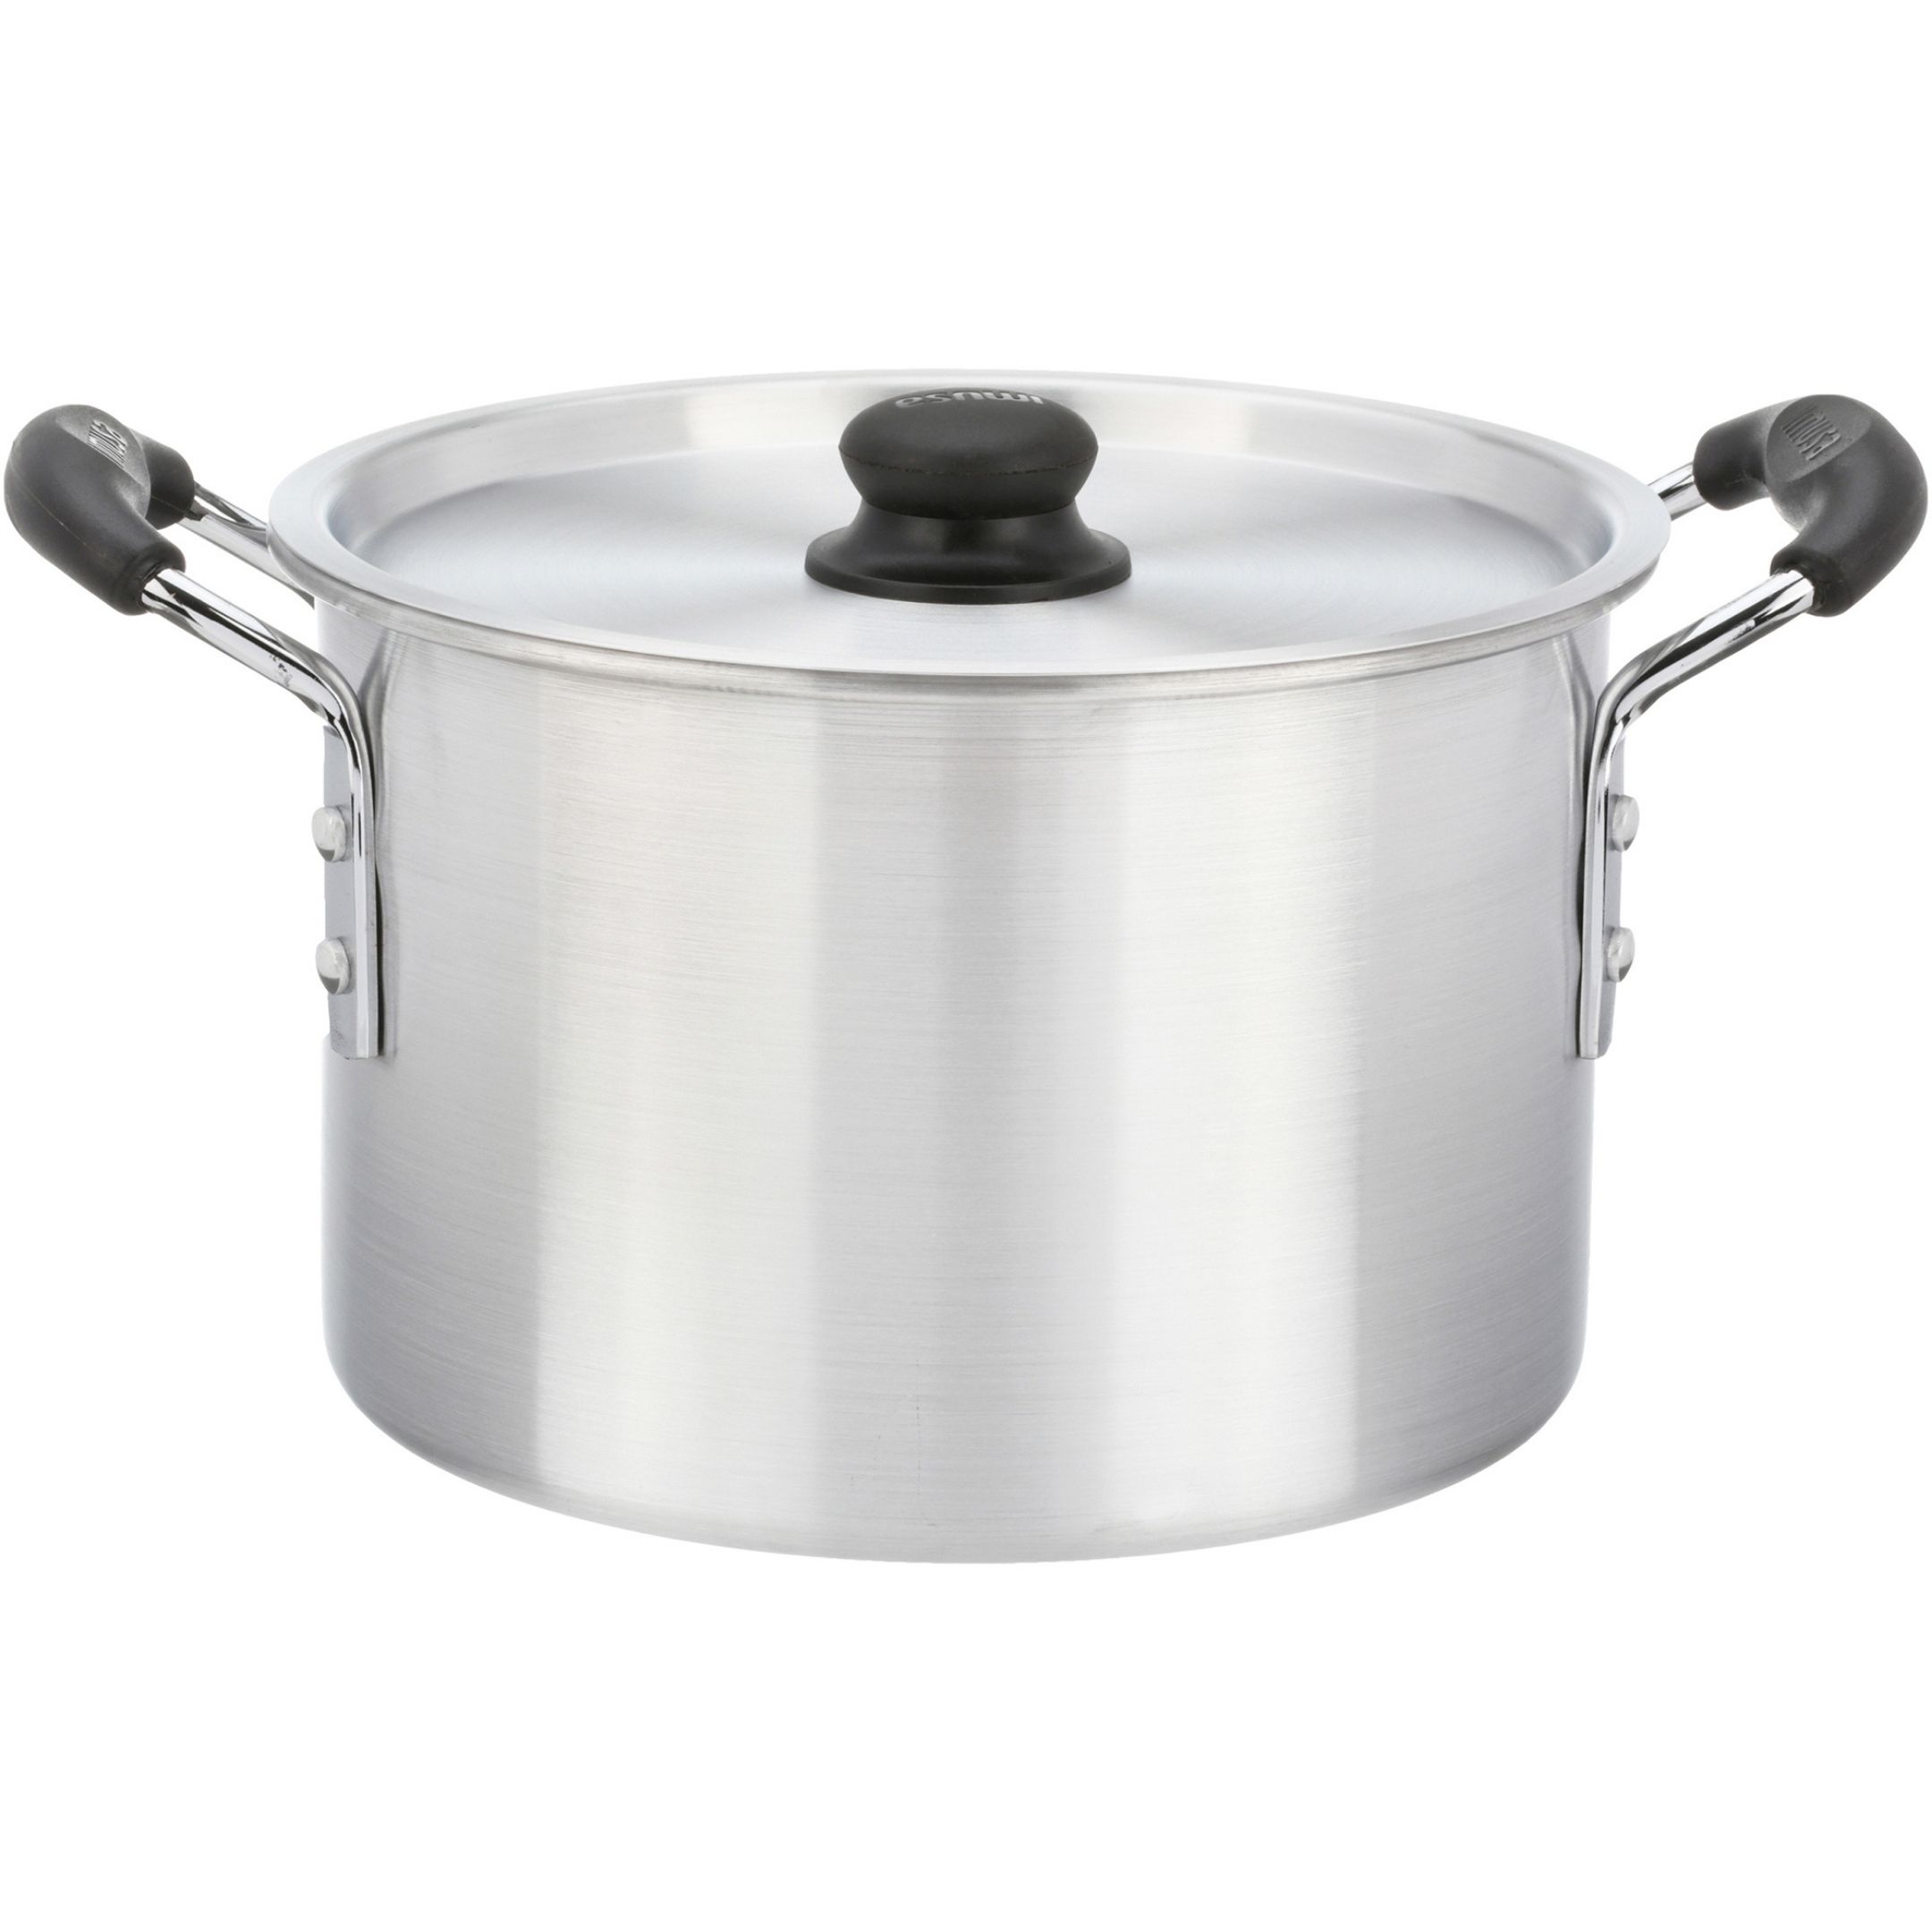 Imusa 8Qt Aluminum Stock Pot with Lid - image 1 of 13